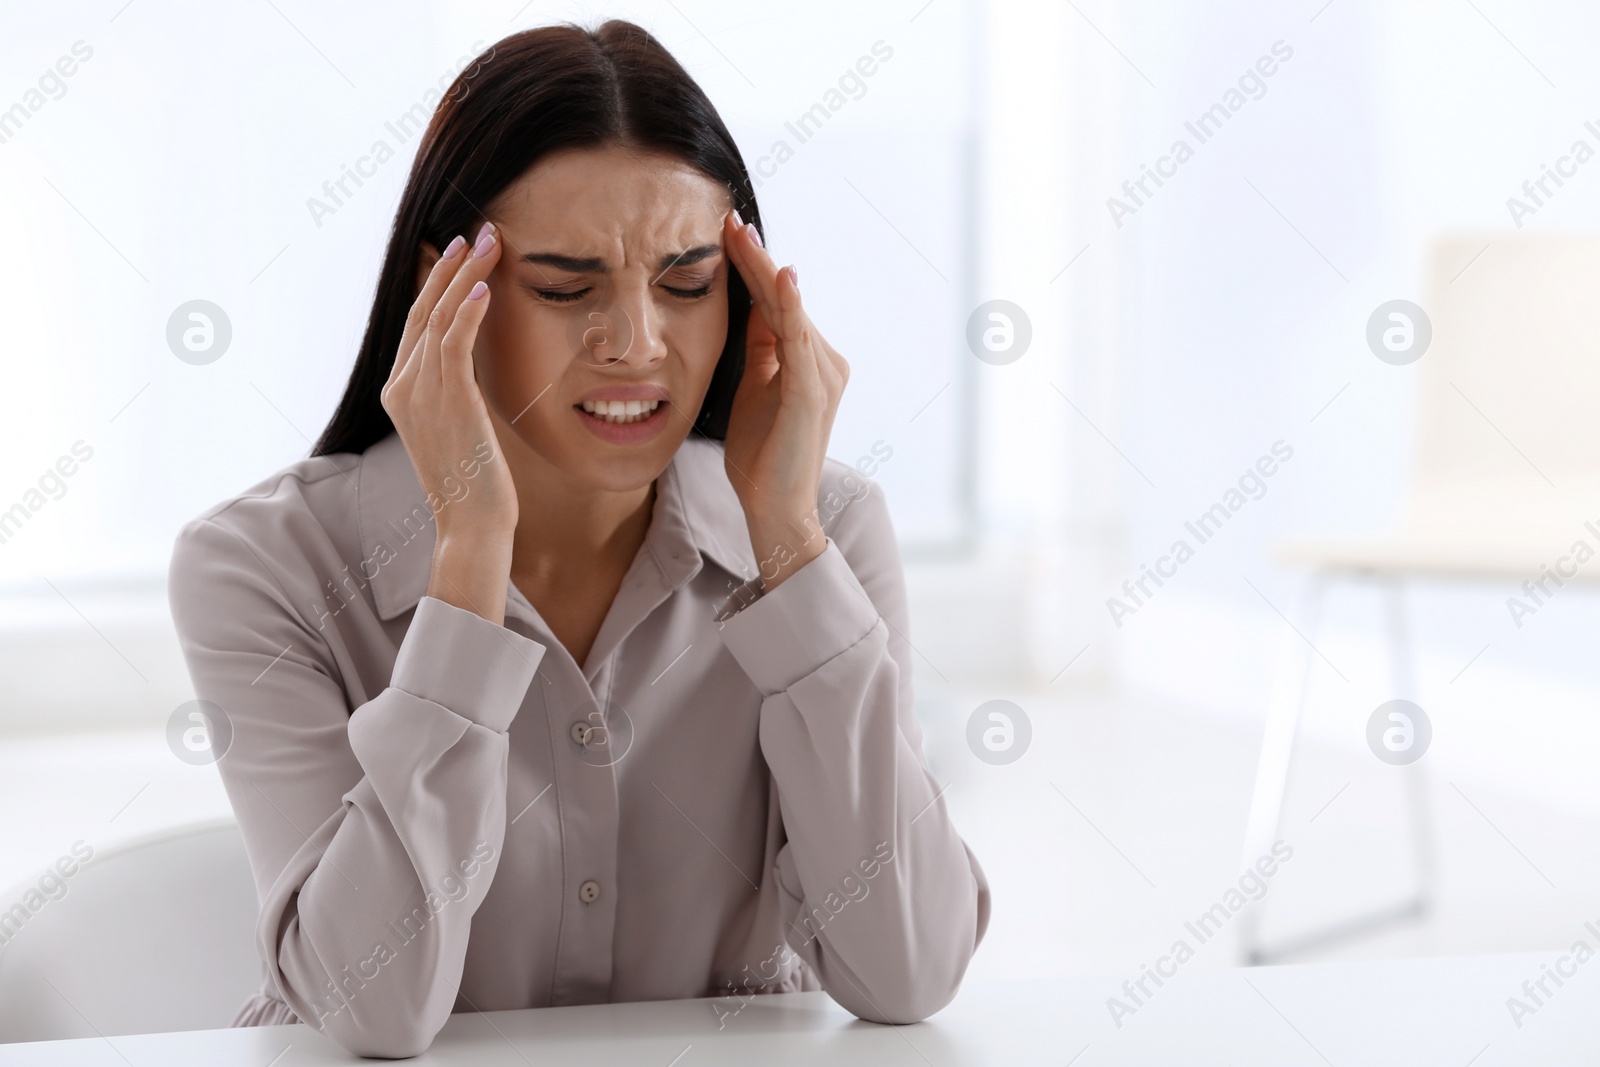 Photo of Stressed young woman at table in office